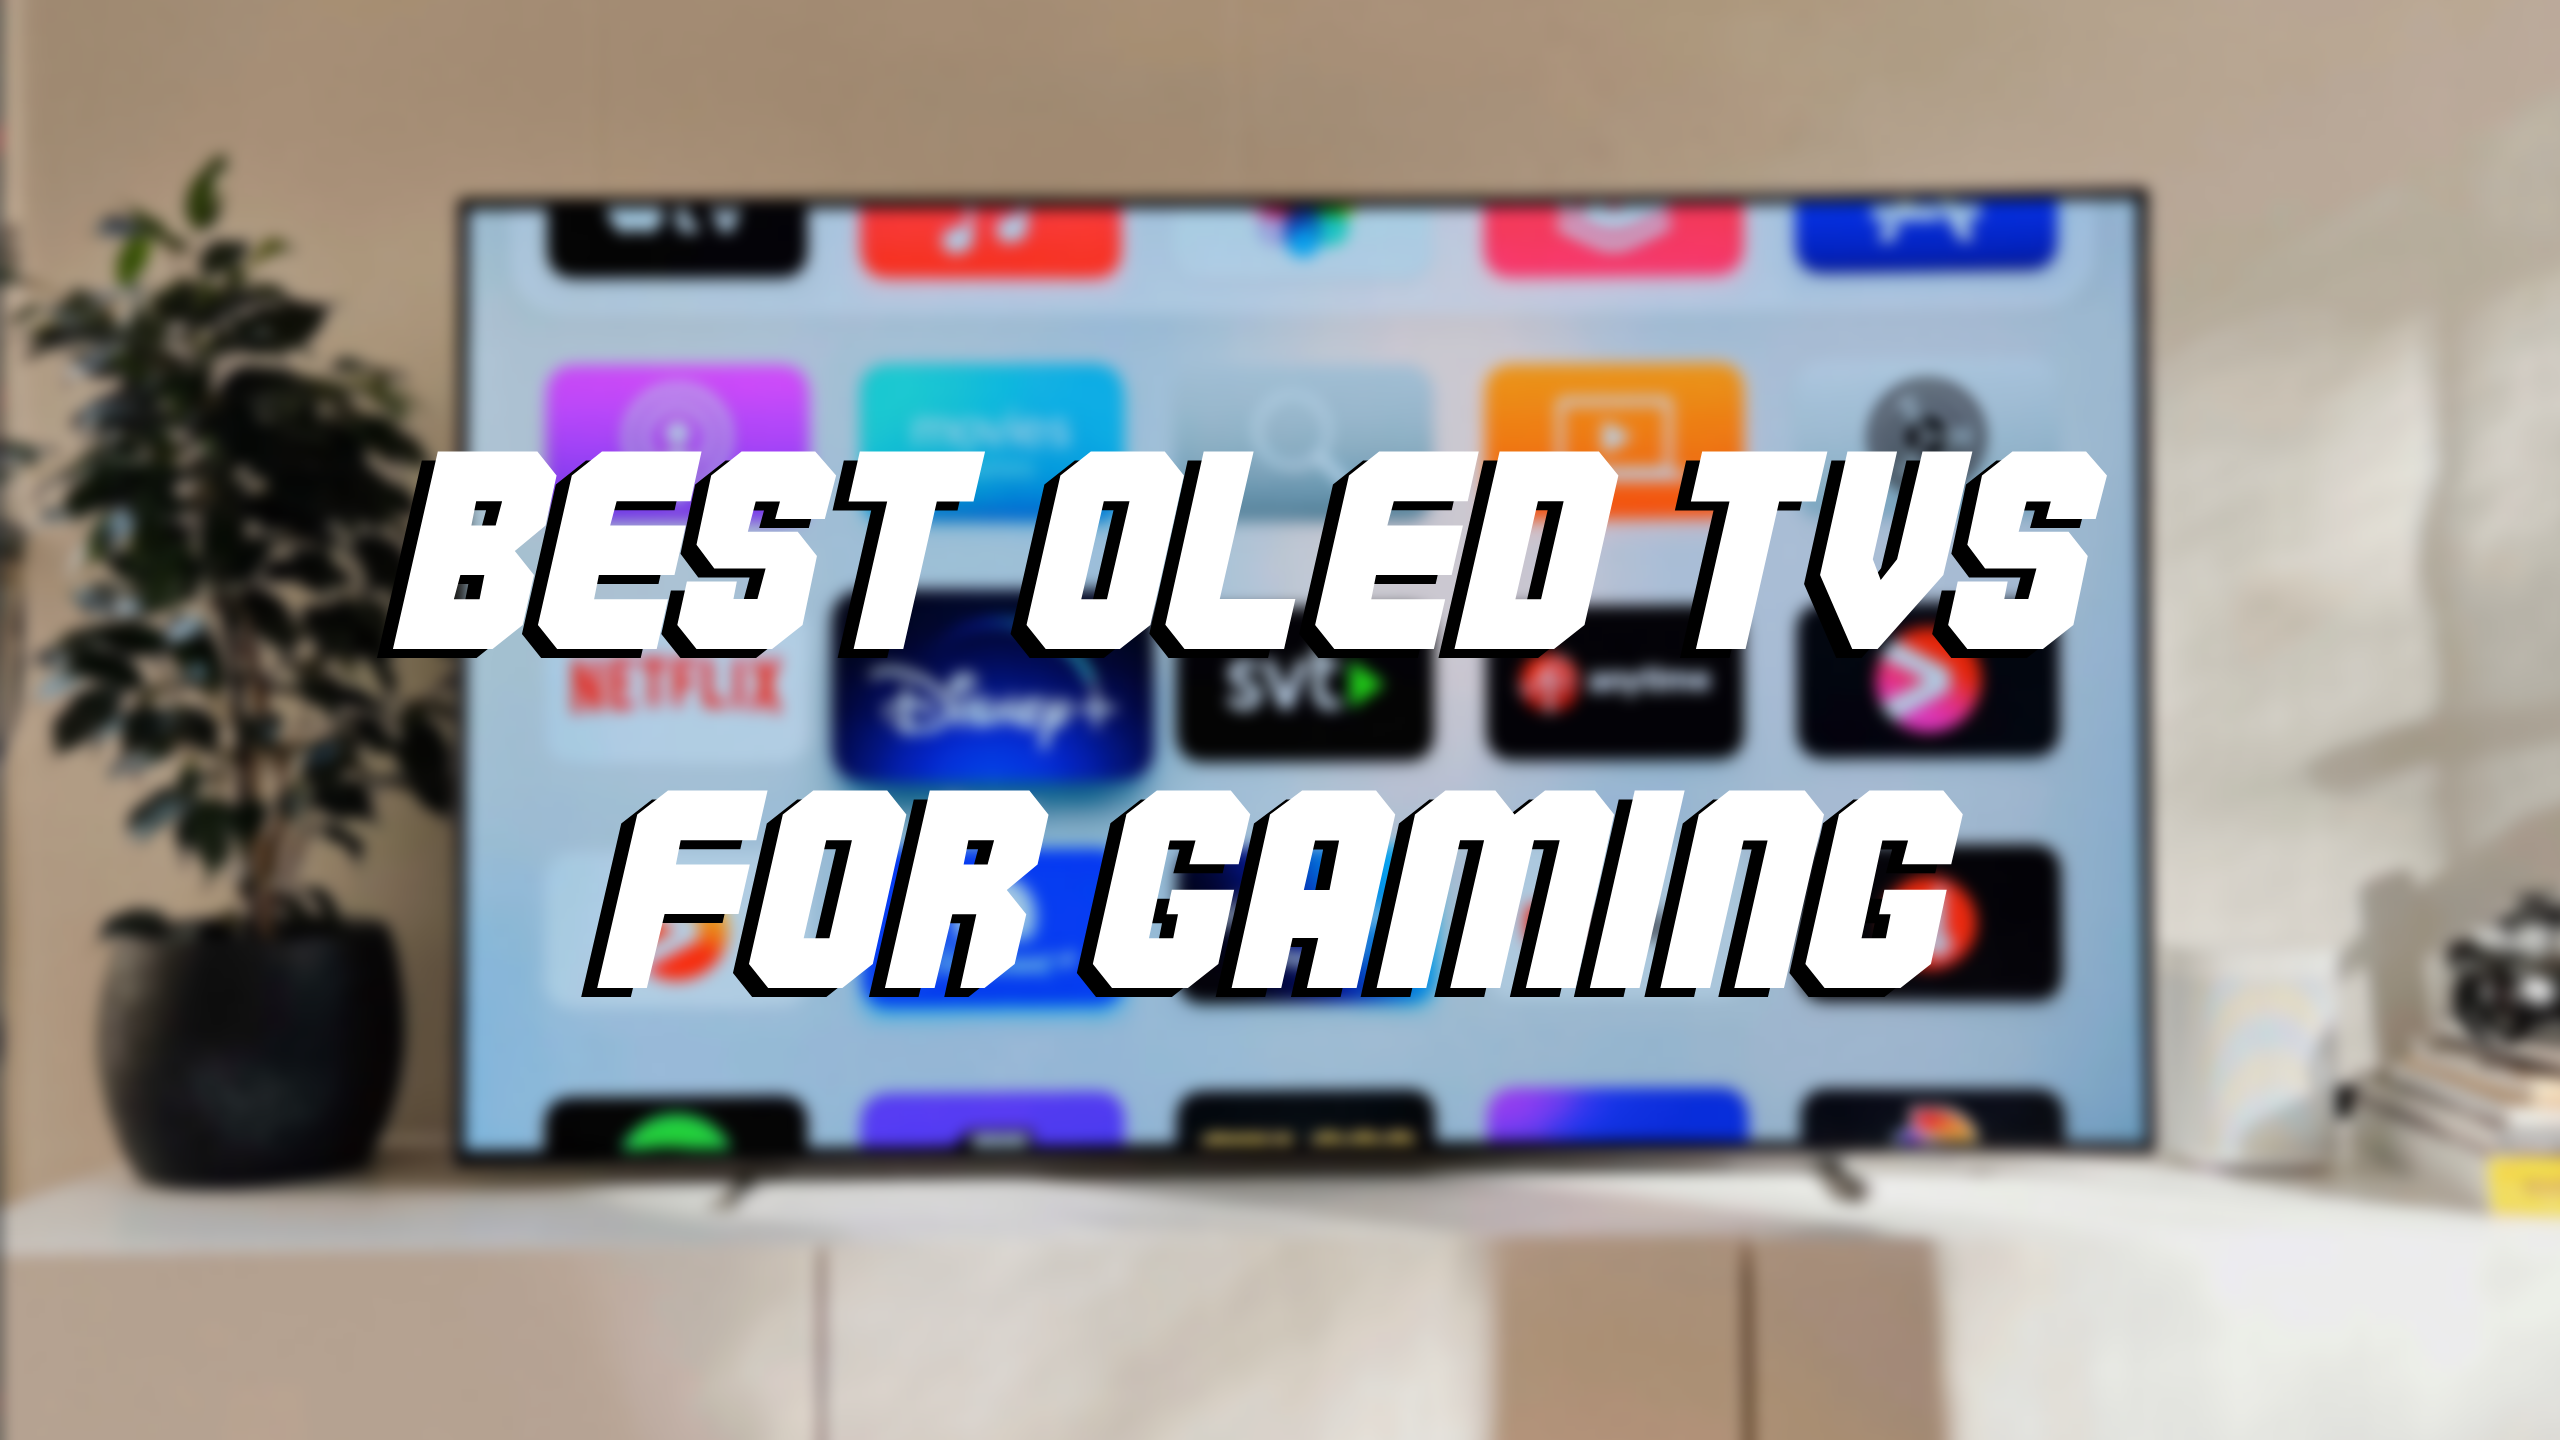 Best OLED TVs for Gaming